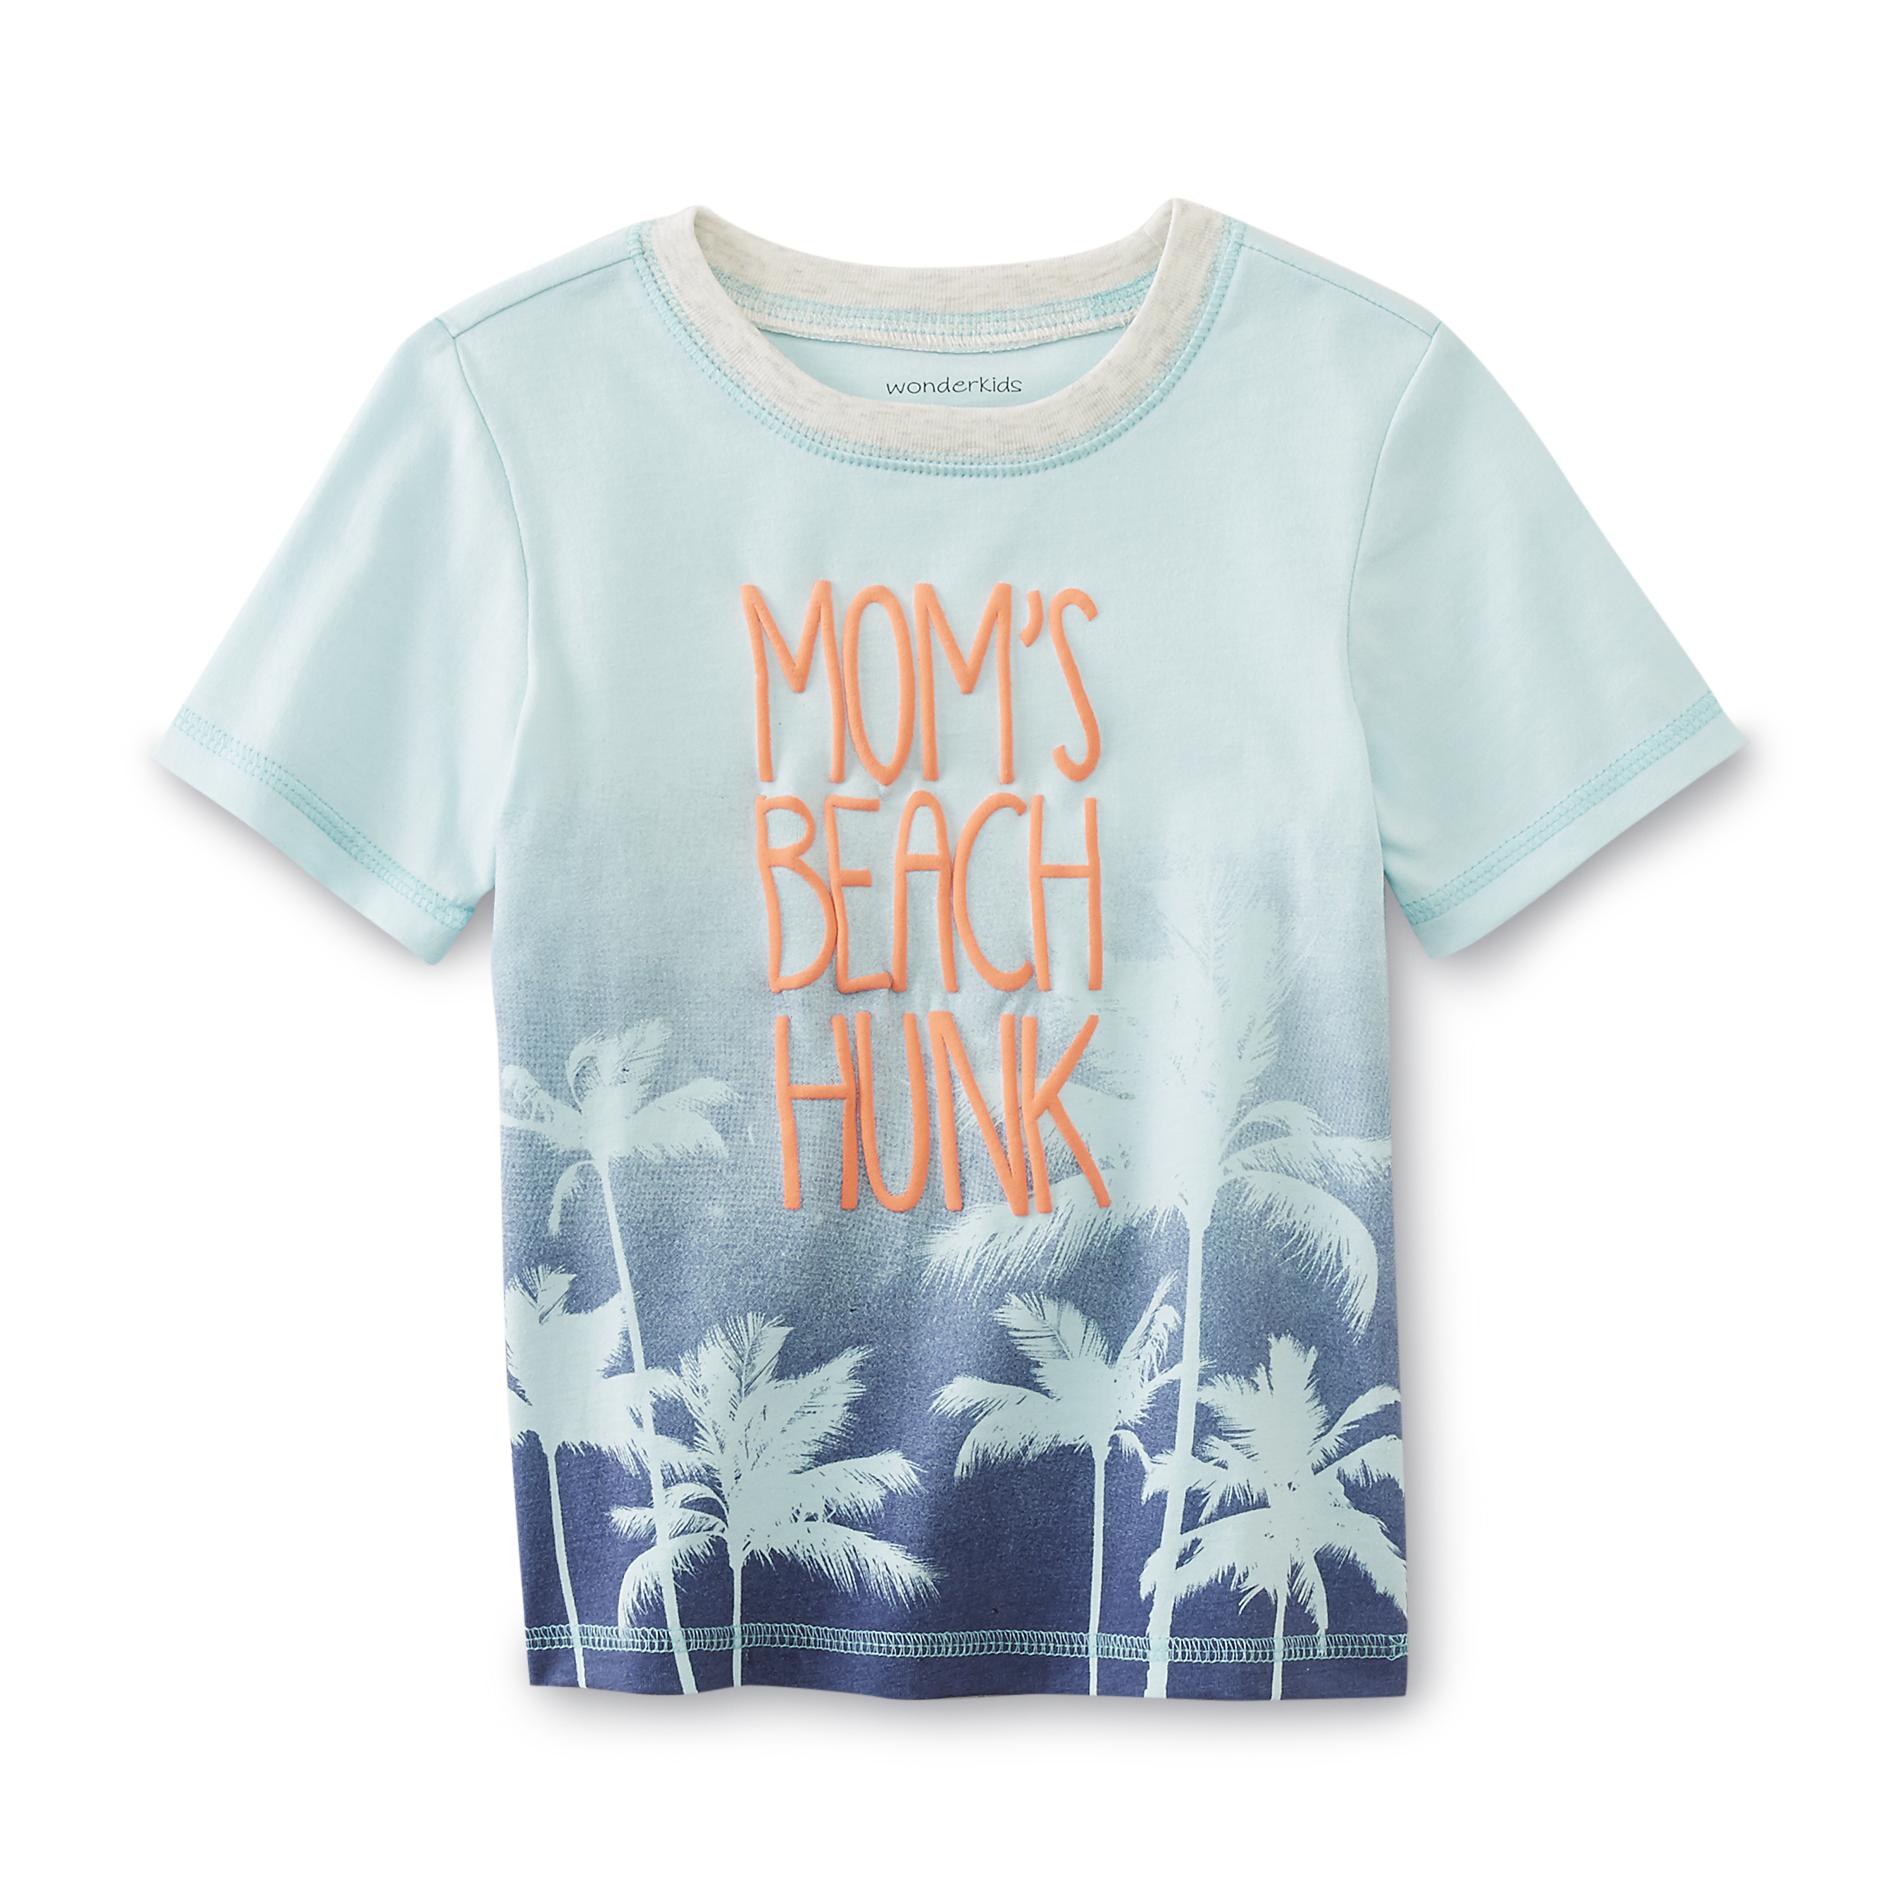 Infant & Toddler Boy's Graphic T-Shirt - Mom's Beach Hunk